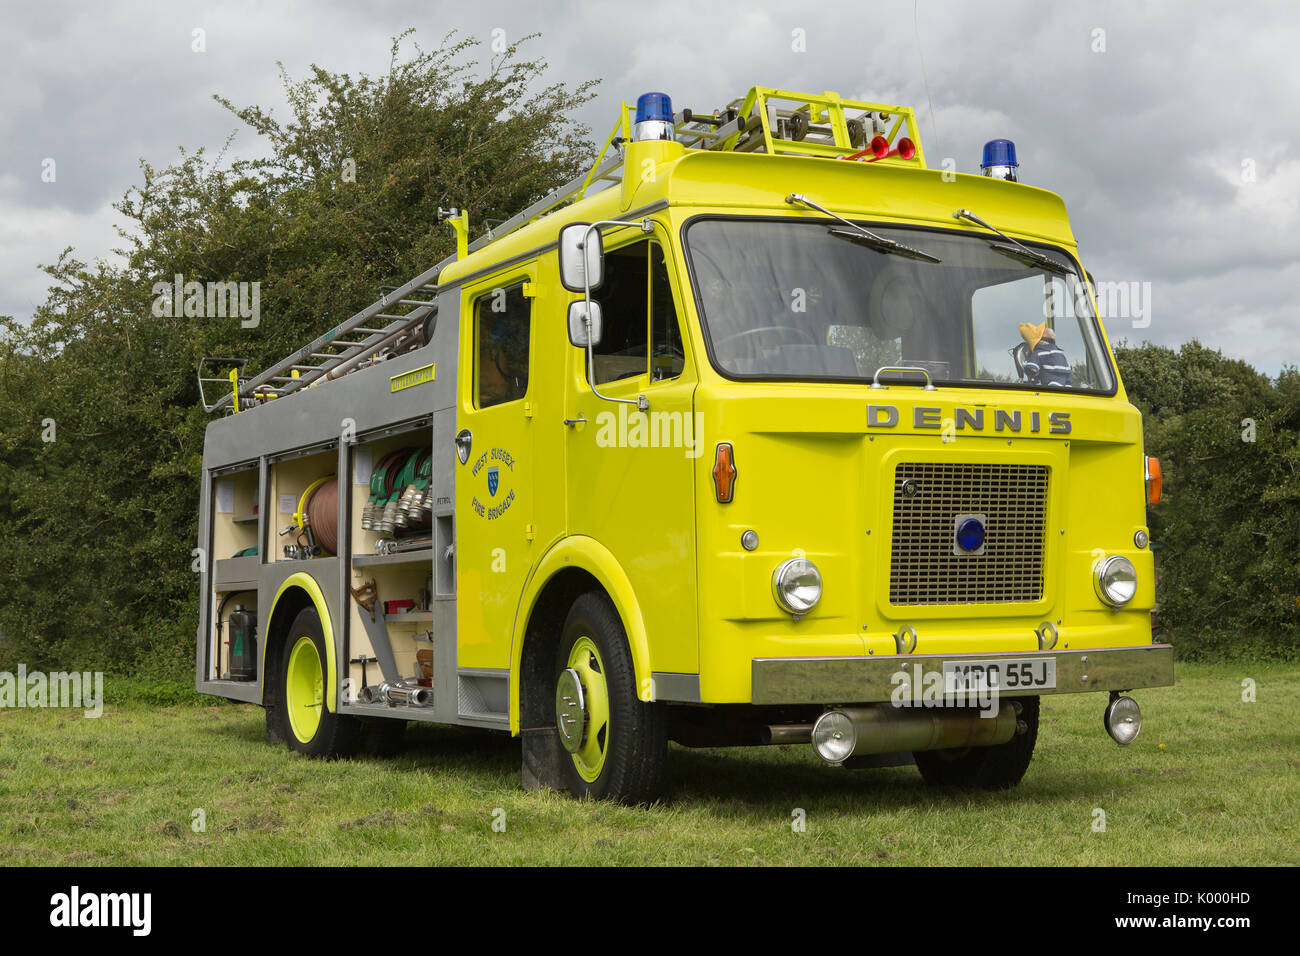 1970 Vintage Dennis fire appliance in yellow livery stationary in a rural setting. Side shutters open showing the preserved fire fighting equipment. Stock Photo